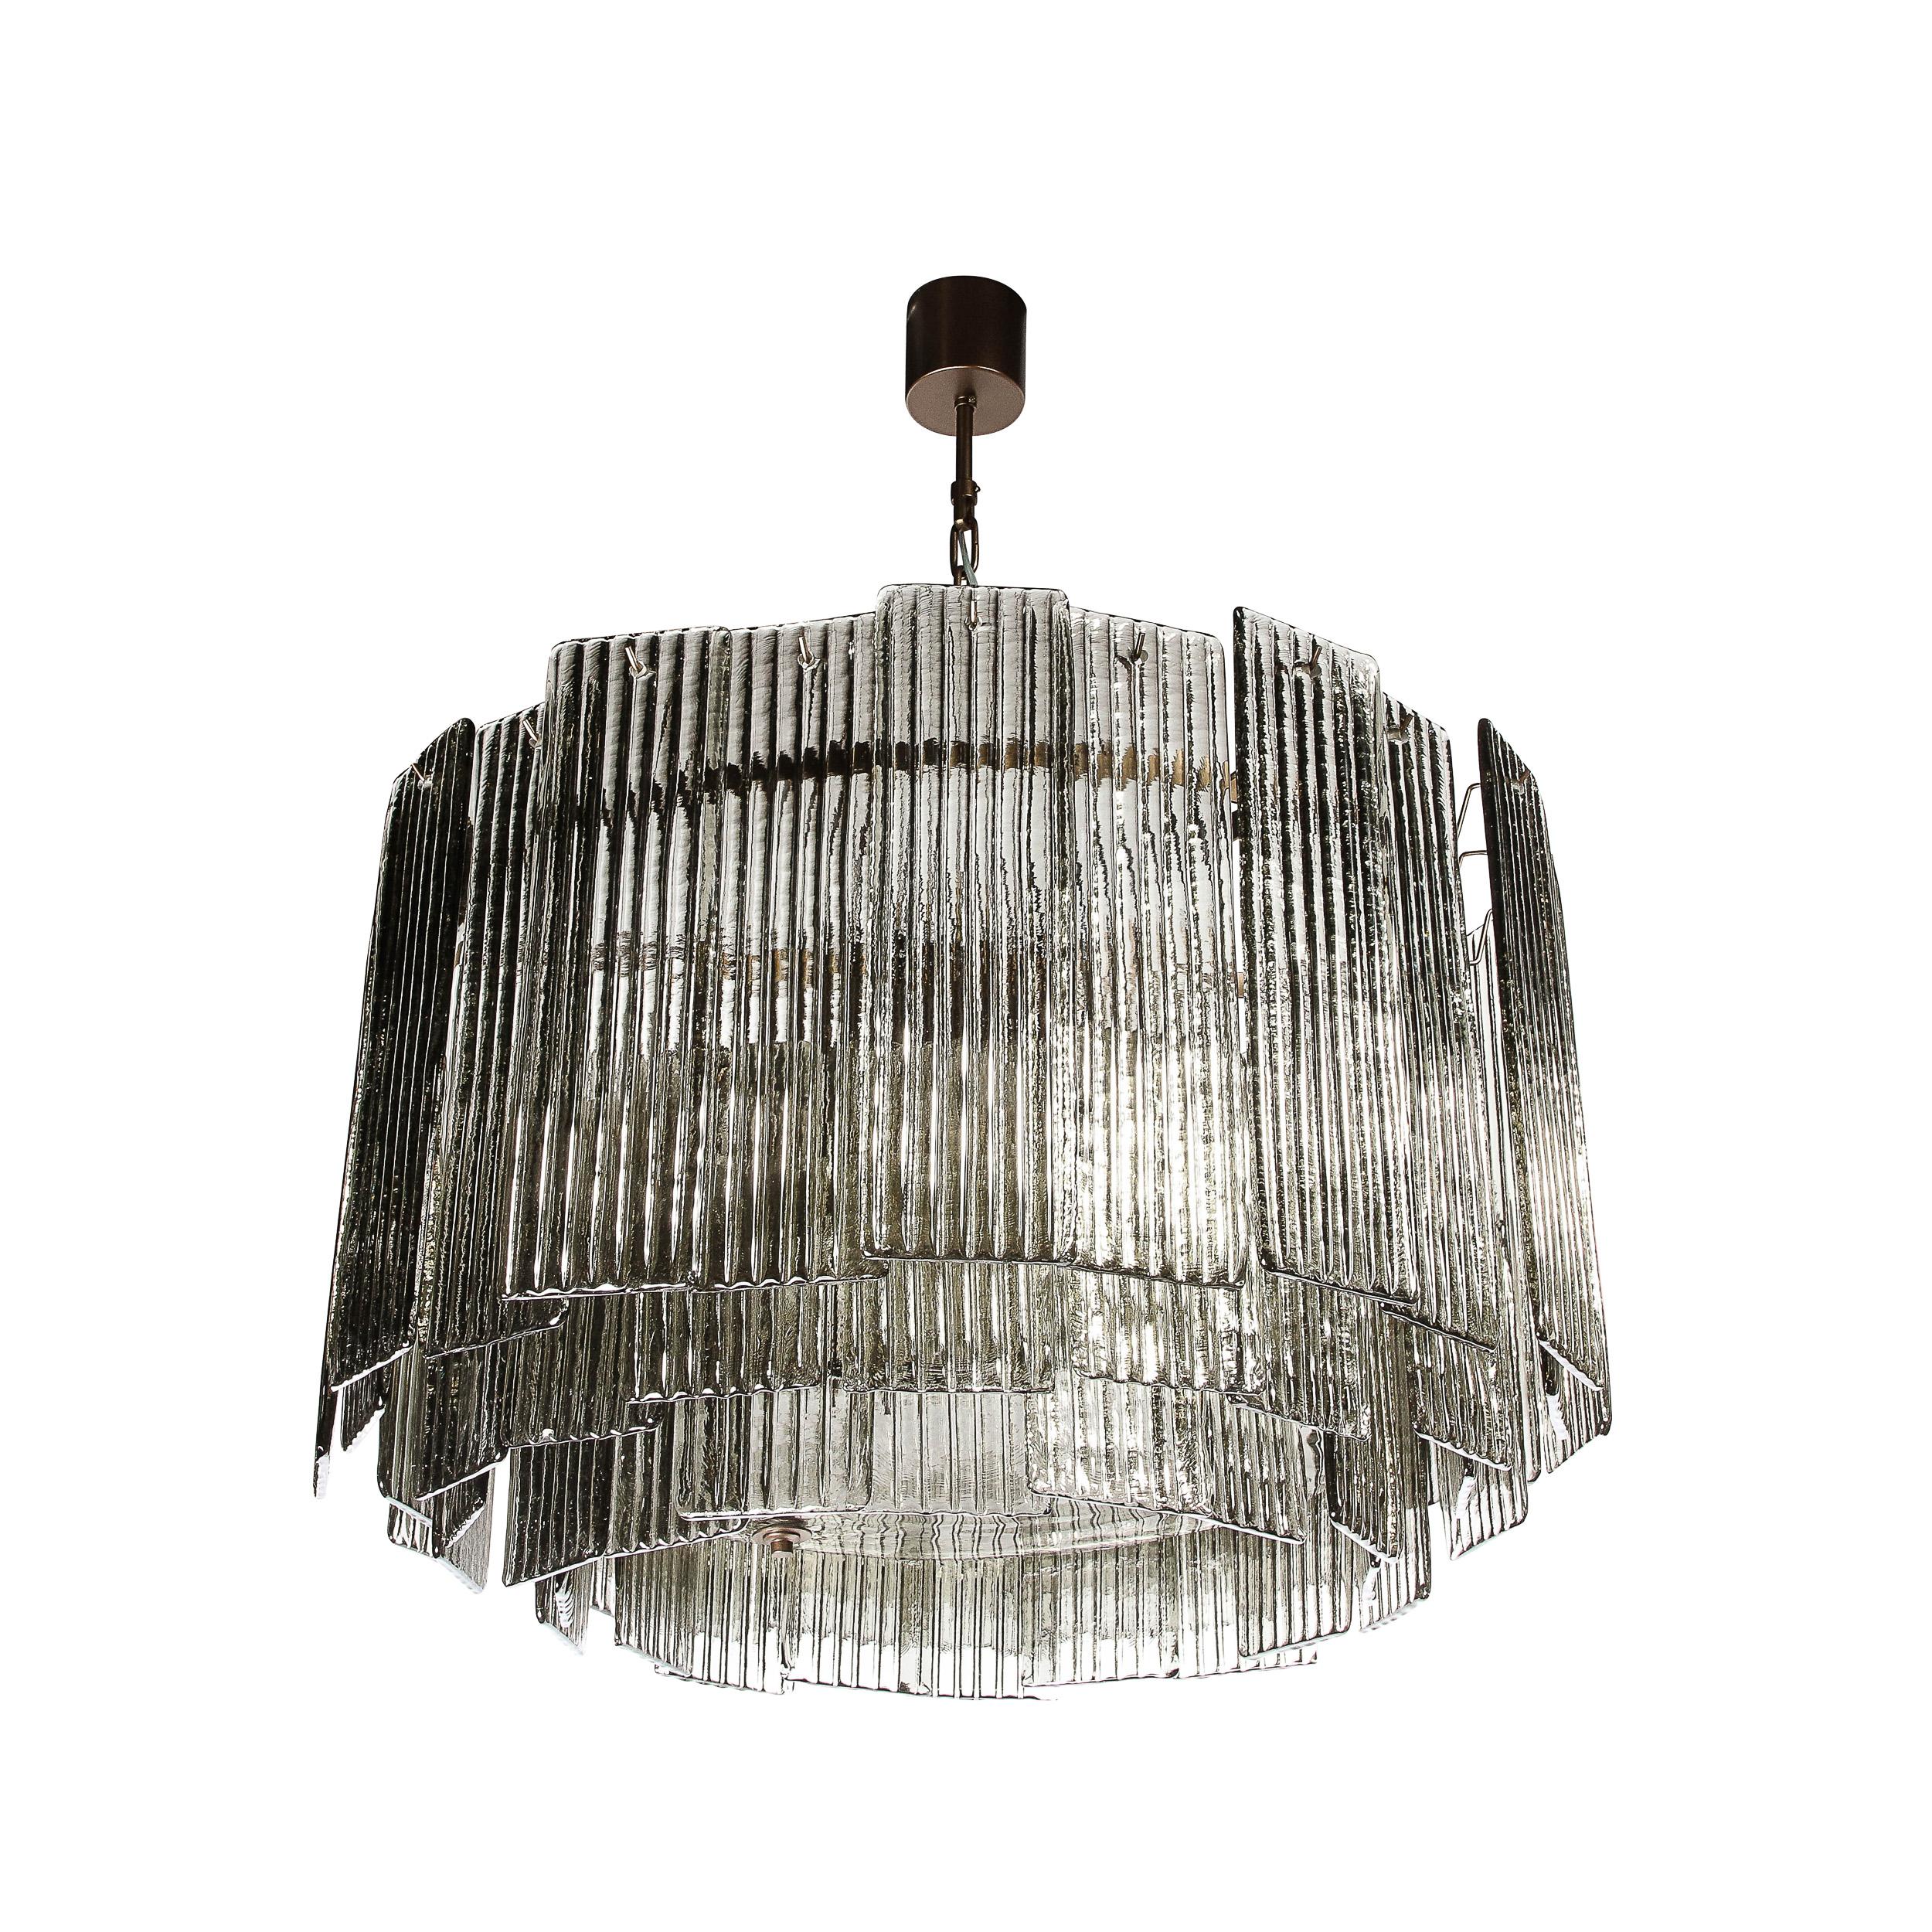 This bold and substantial Modernist Three Tiered Hand-Blown Murano Smoked Topaz Reeded Glass Chandelier originates from Italy during the 21st Century. Featuring large rectangular panels of beautiful reeded glass elements surrounding the piece in